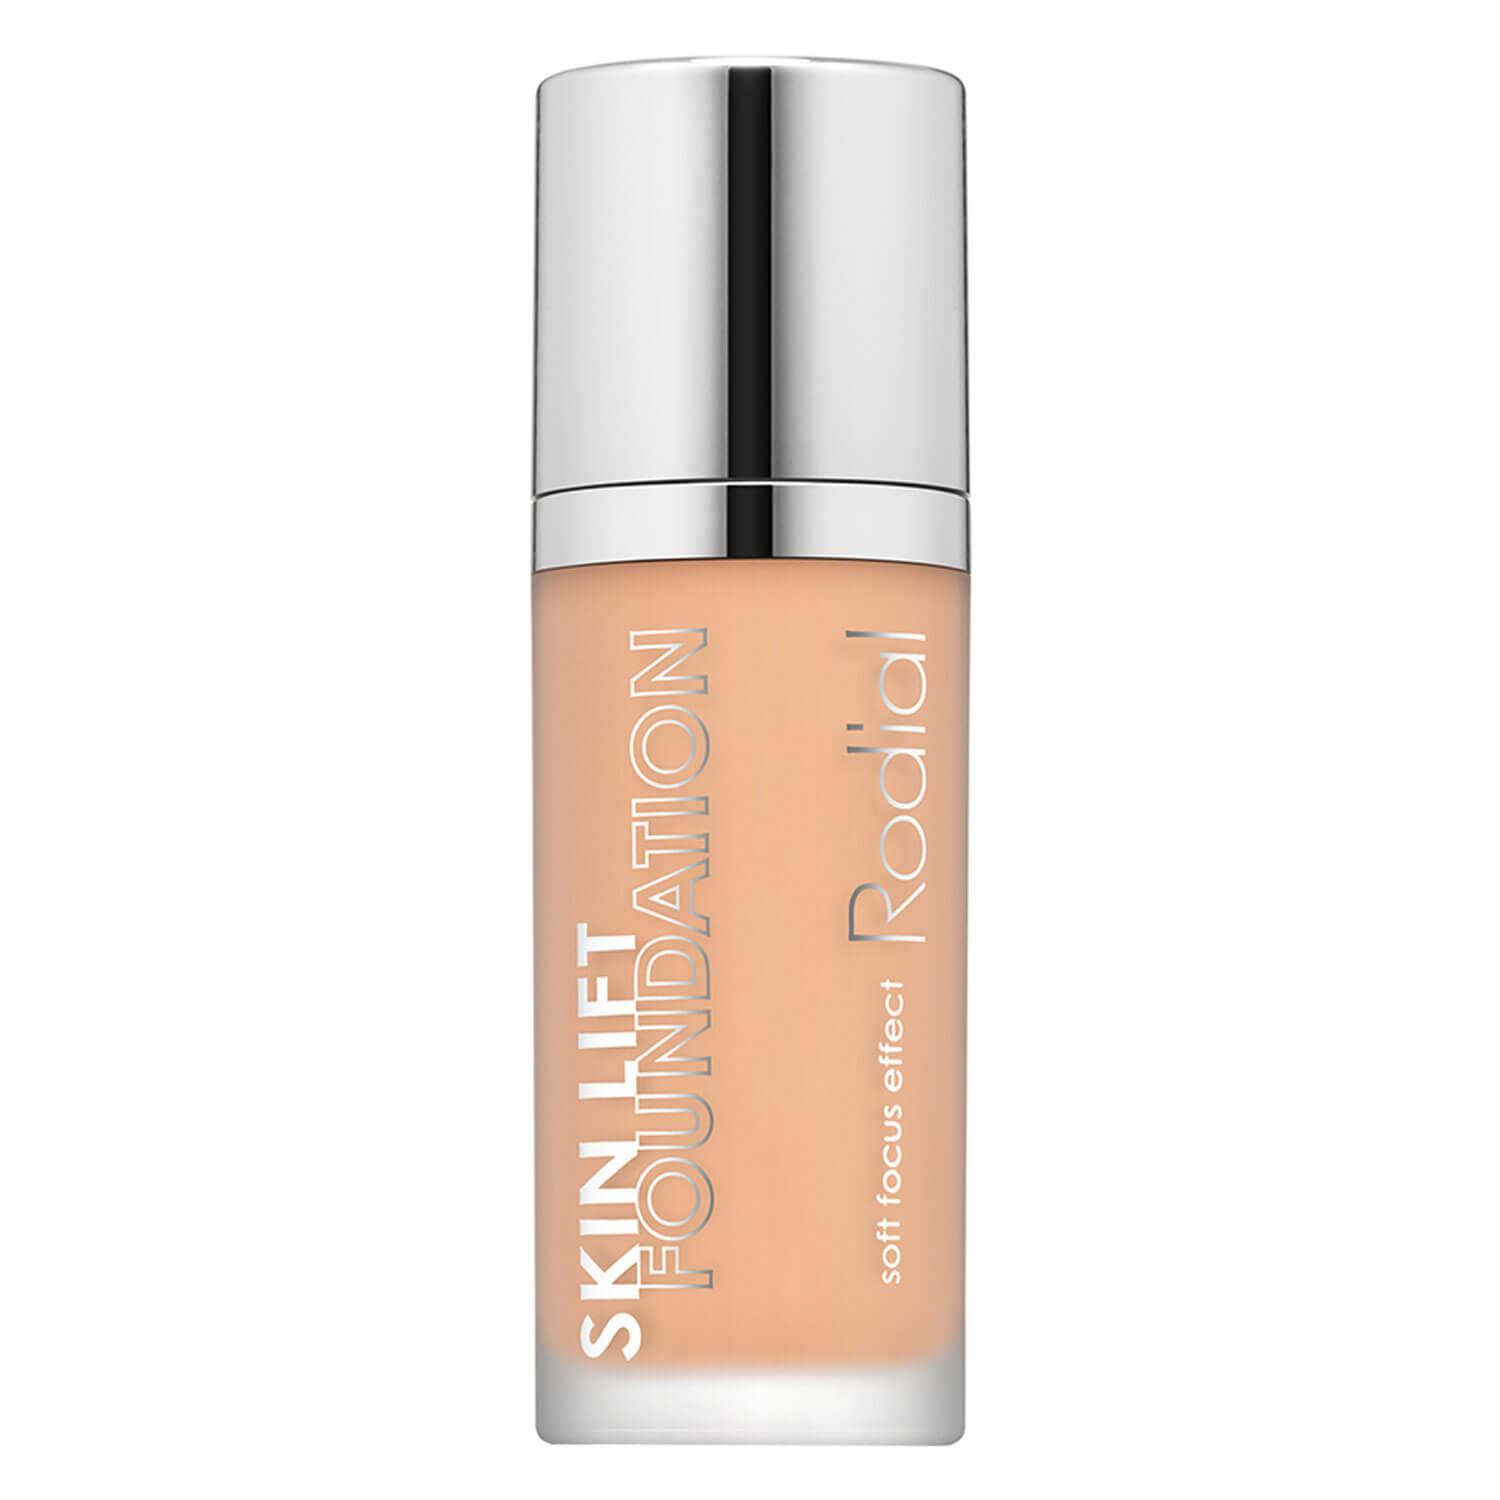 Rodial Make-up - Skin Lift Foundation Biscuit